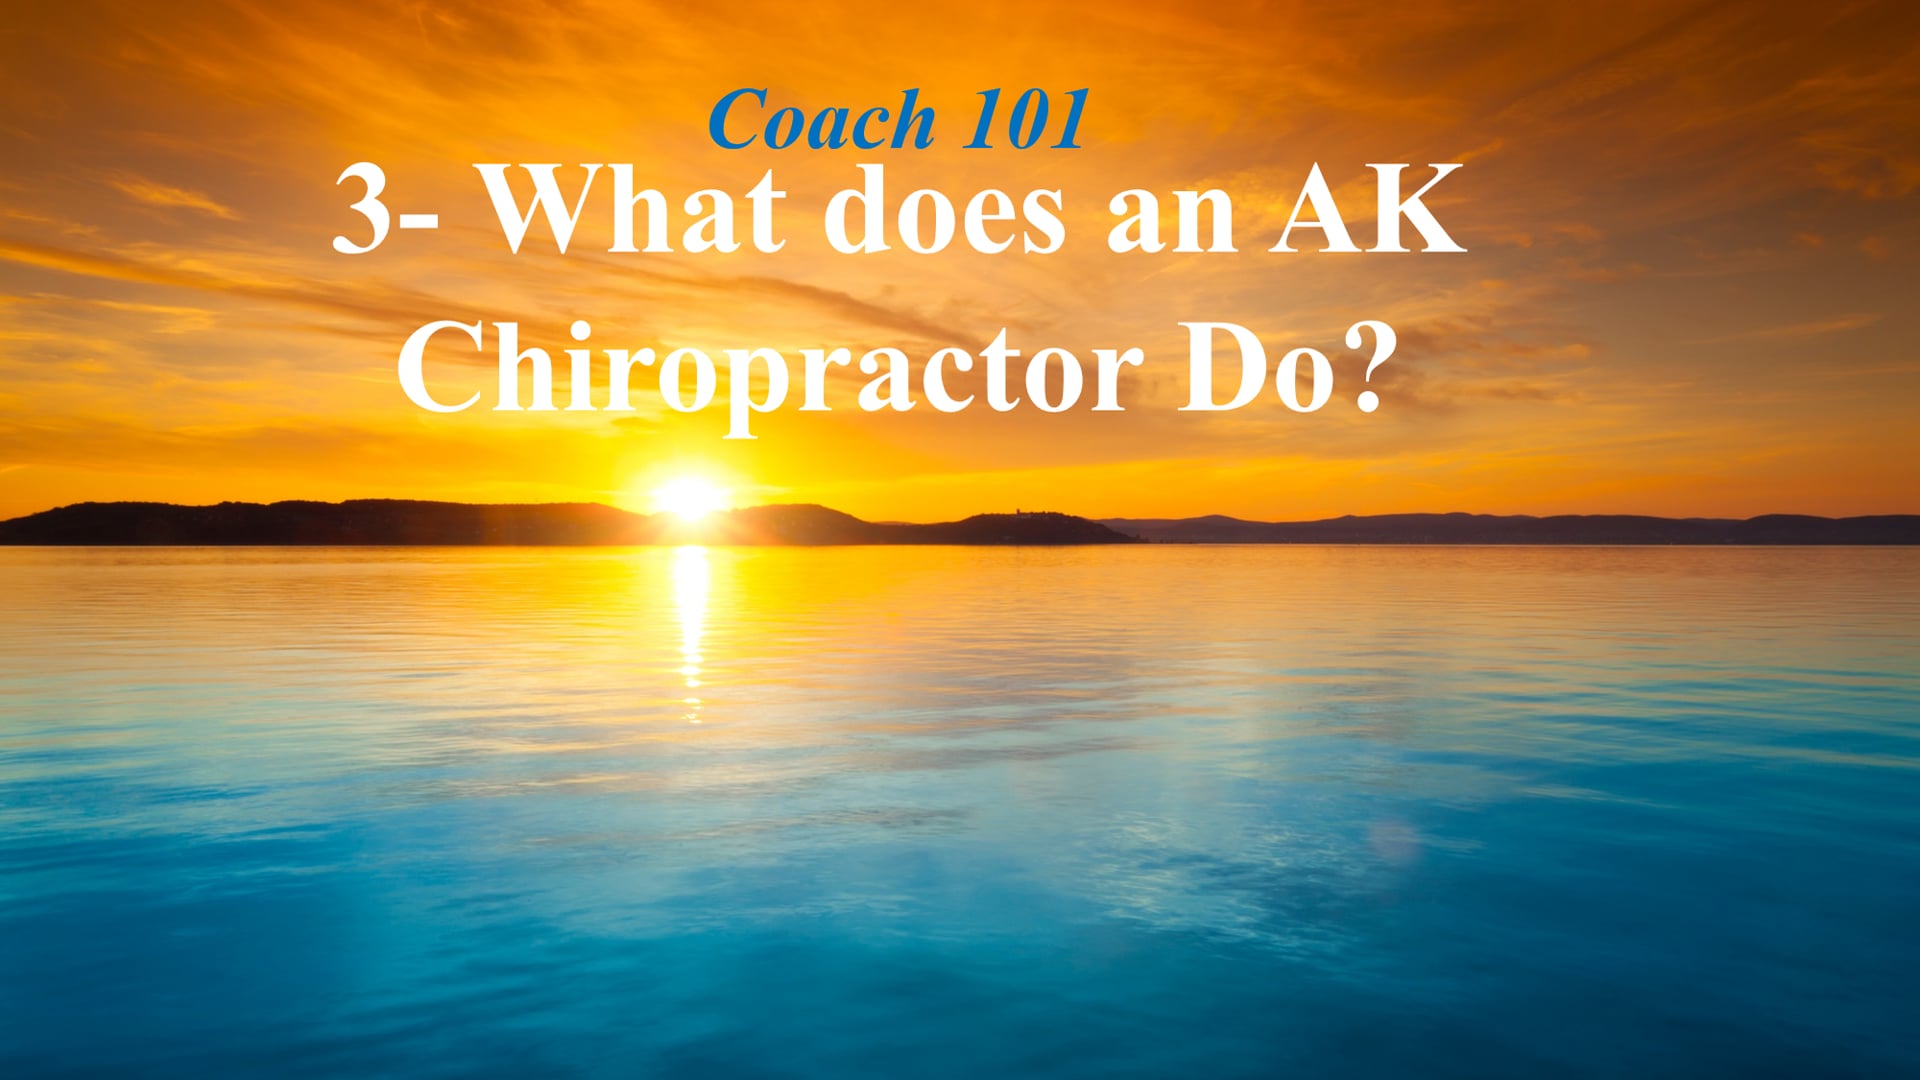 3- What Does an AK Chiropractor Do?